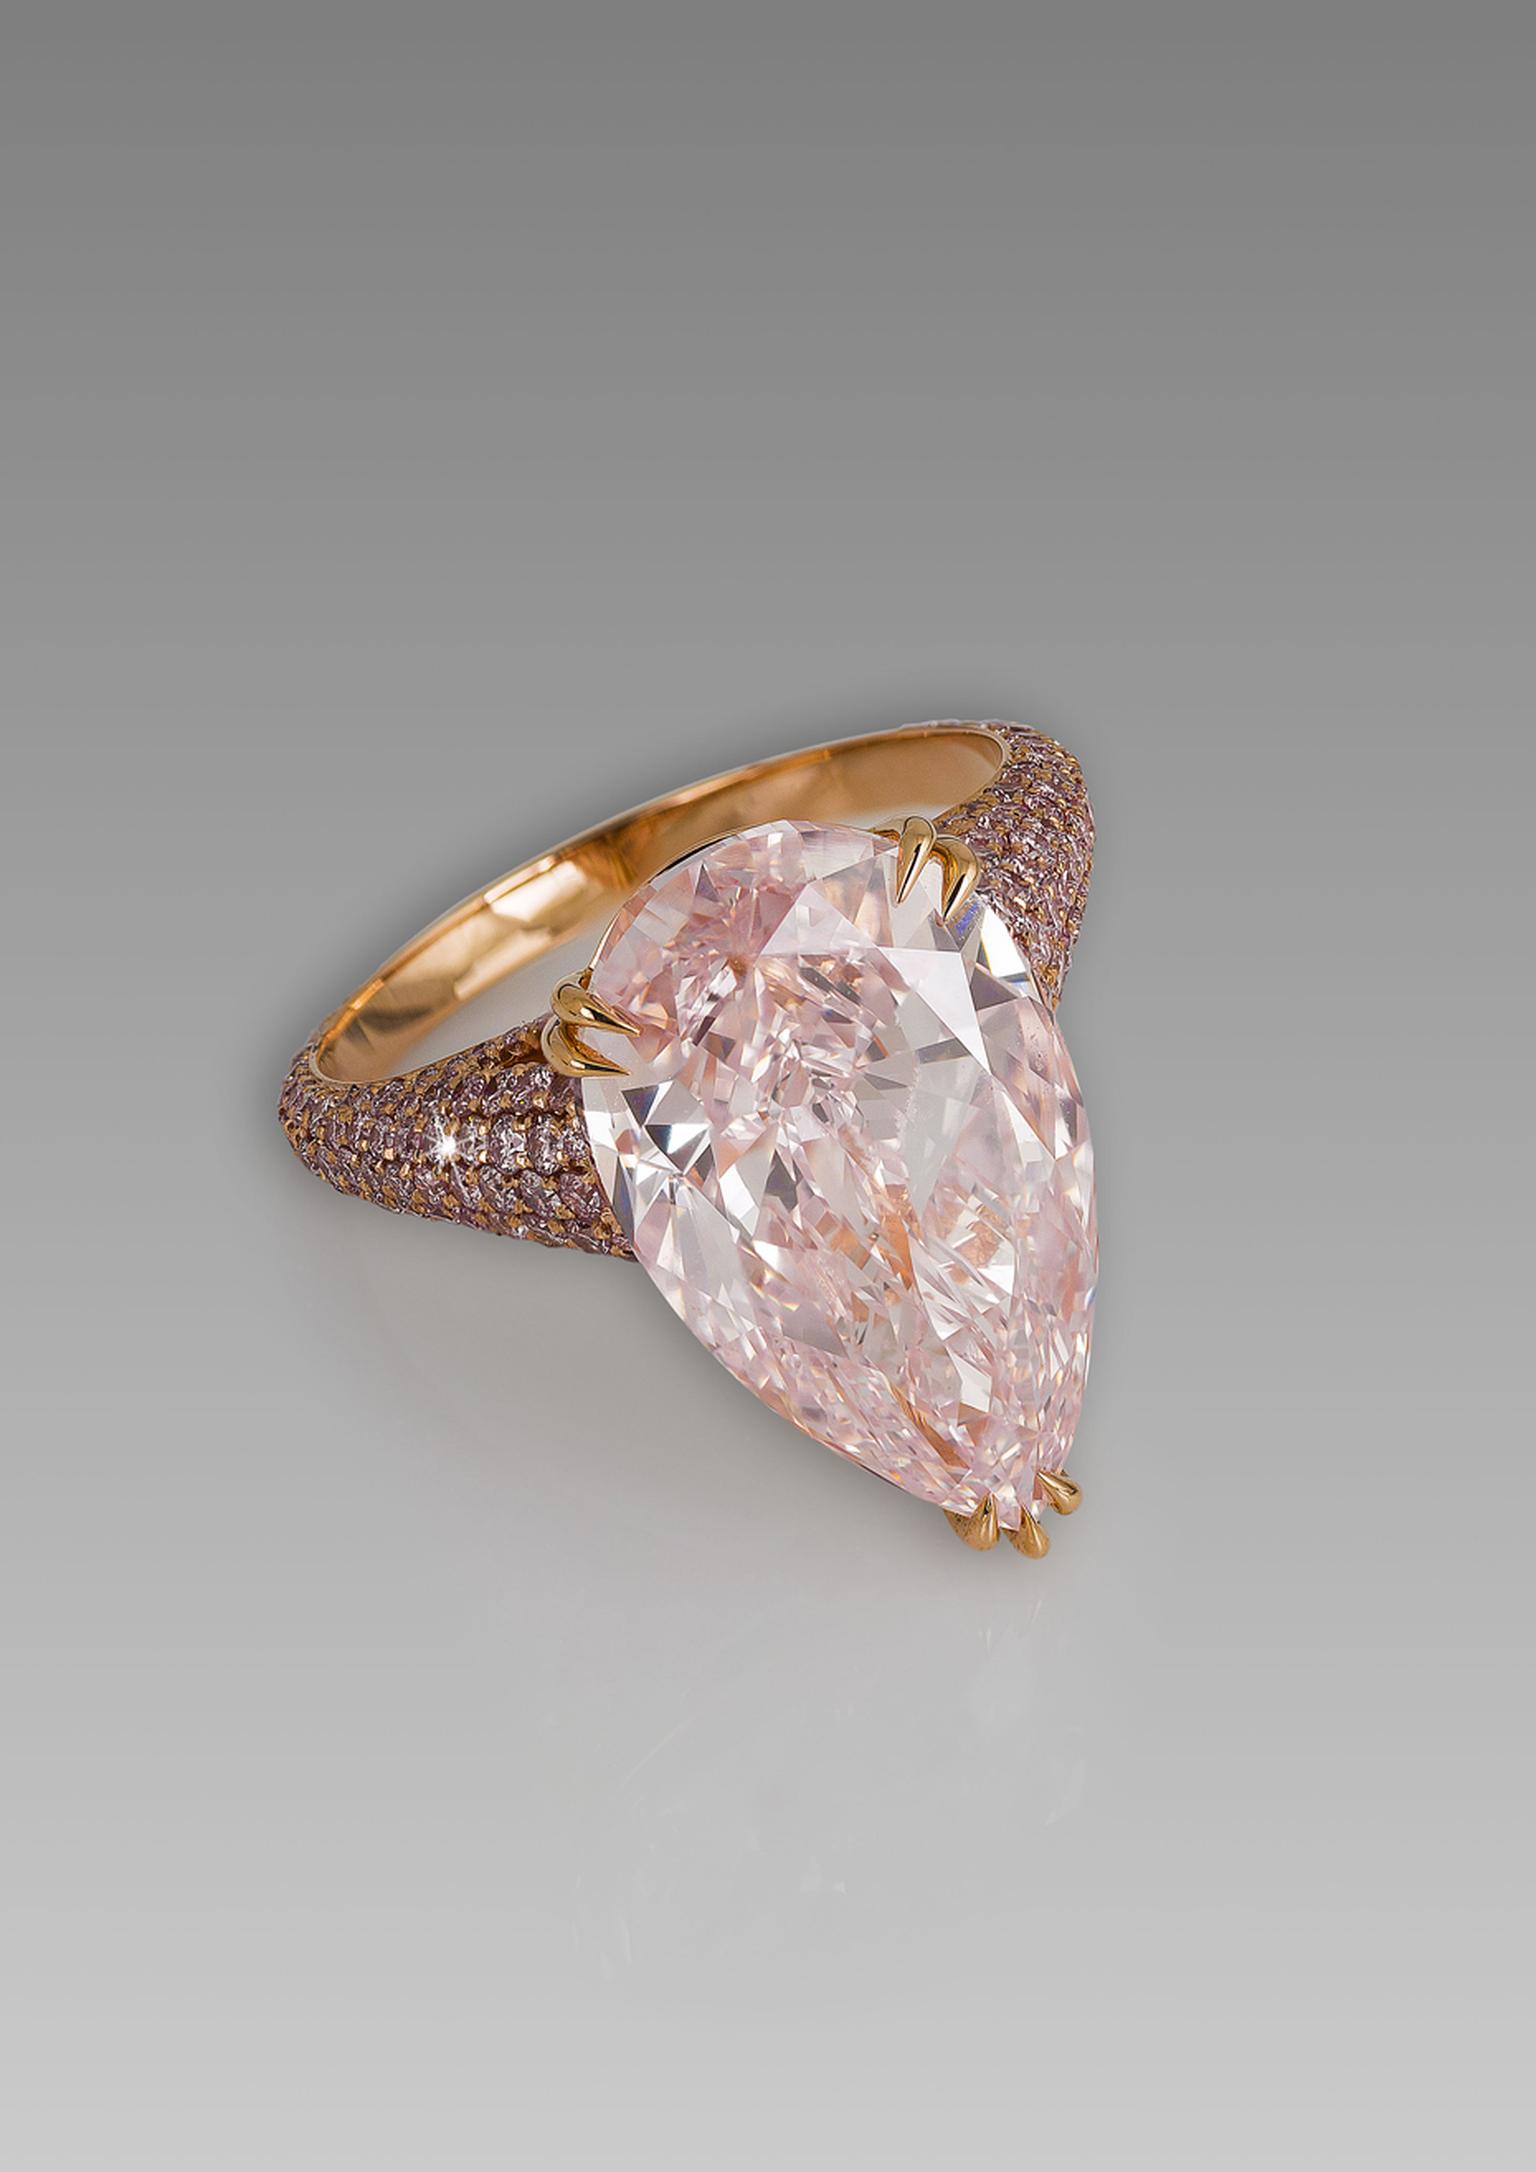 The Fortune Pink Mesmerizes Potential Diamond Buyers at Christie's